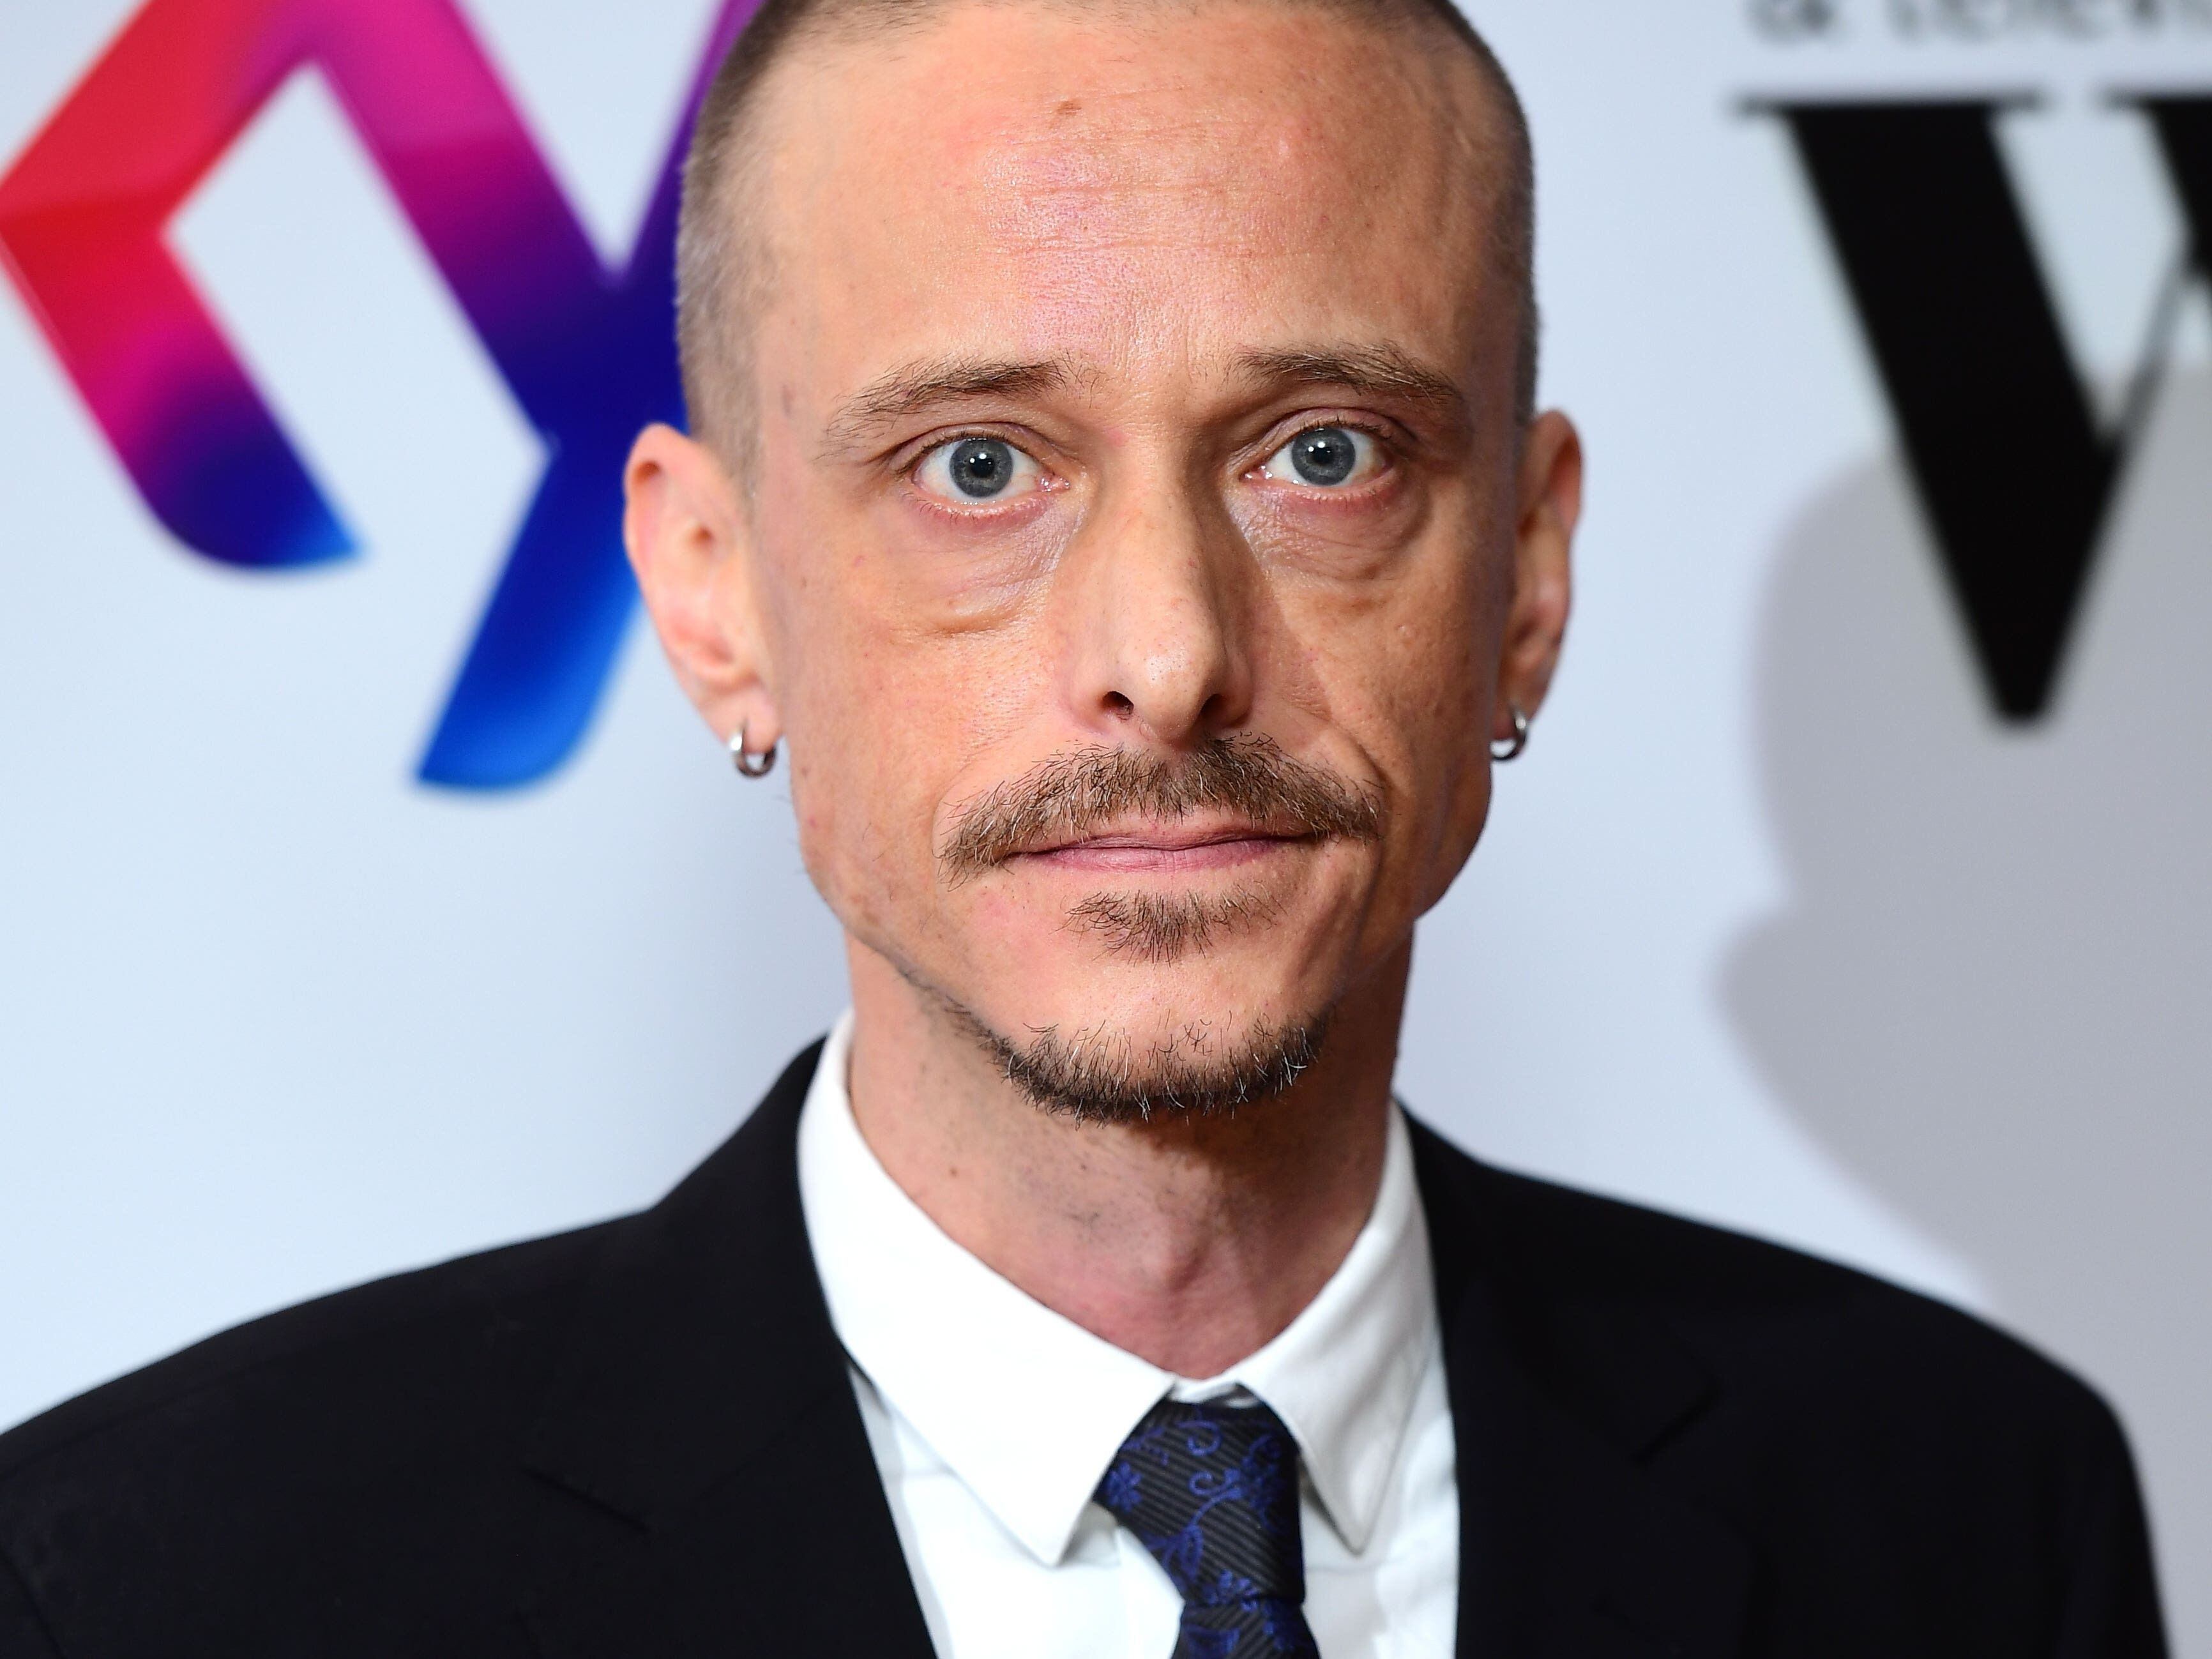 Actor Mackenzie Crook appeals to public to help find sister-in-law